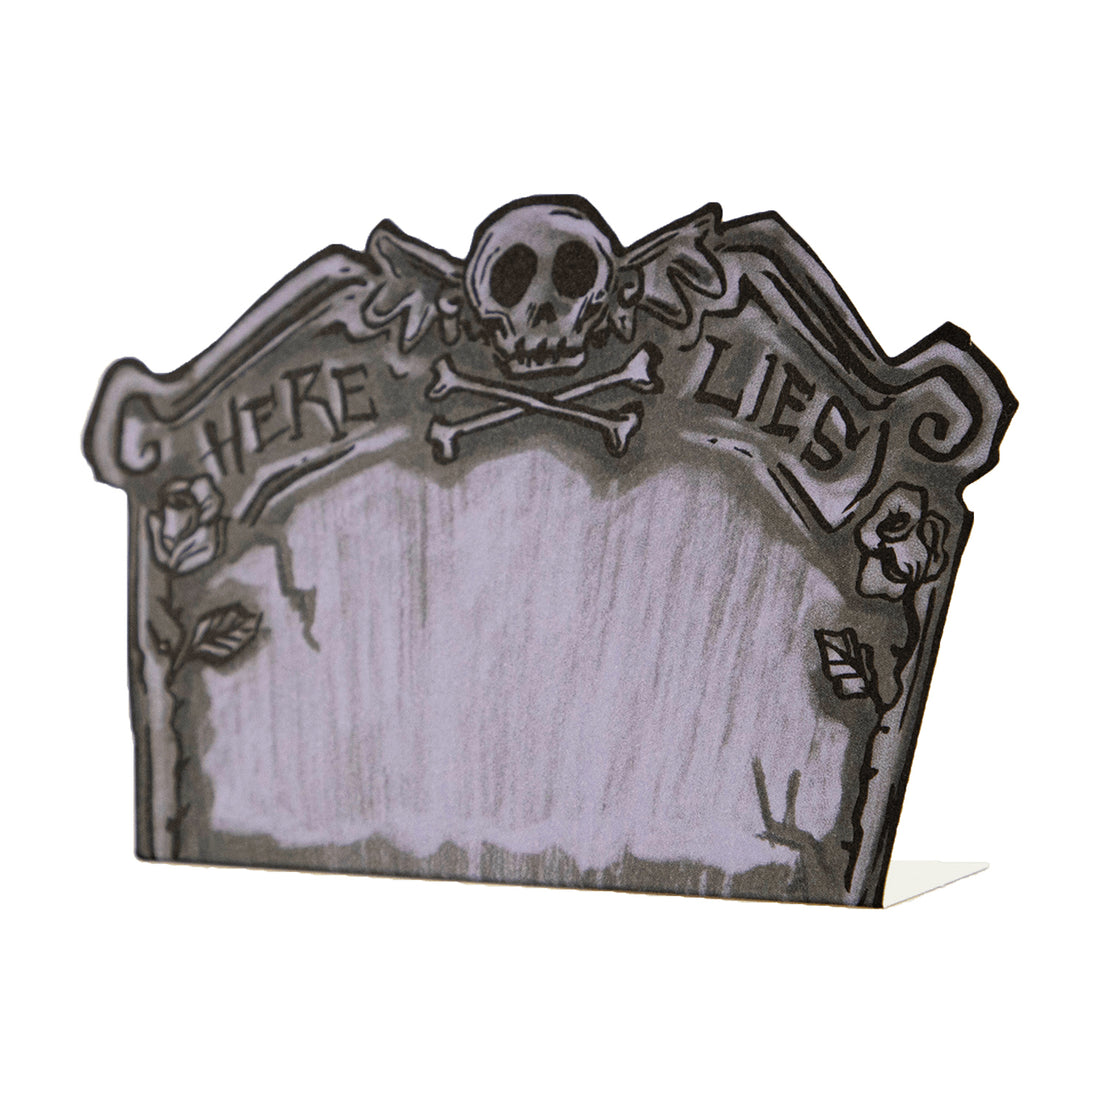 A die-cut freestanding place card depicting a spooky illustrated tombstone in gray with black linework, reading &quot;HERE LIES&quot; across the top with a skull and crossbones, and a blank gray area in the middle for personalization.